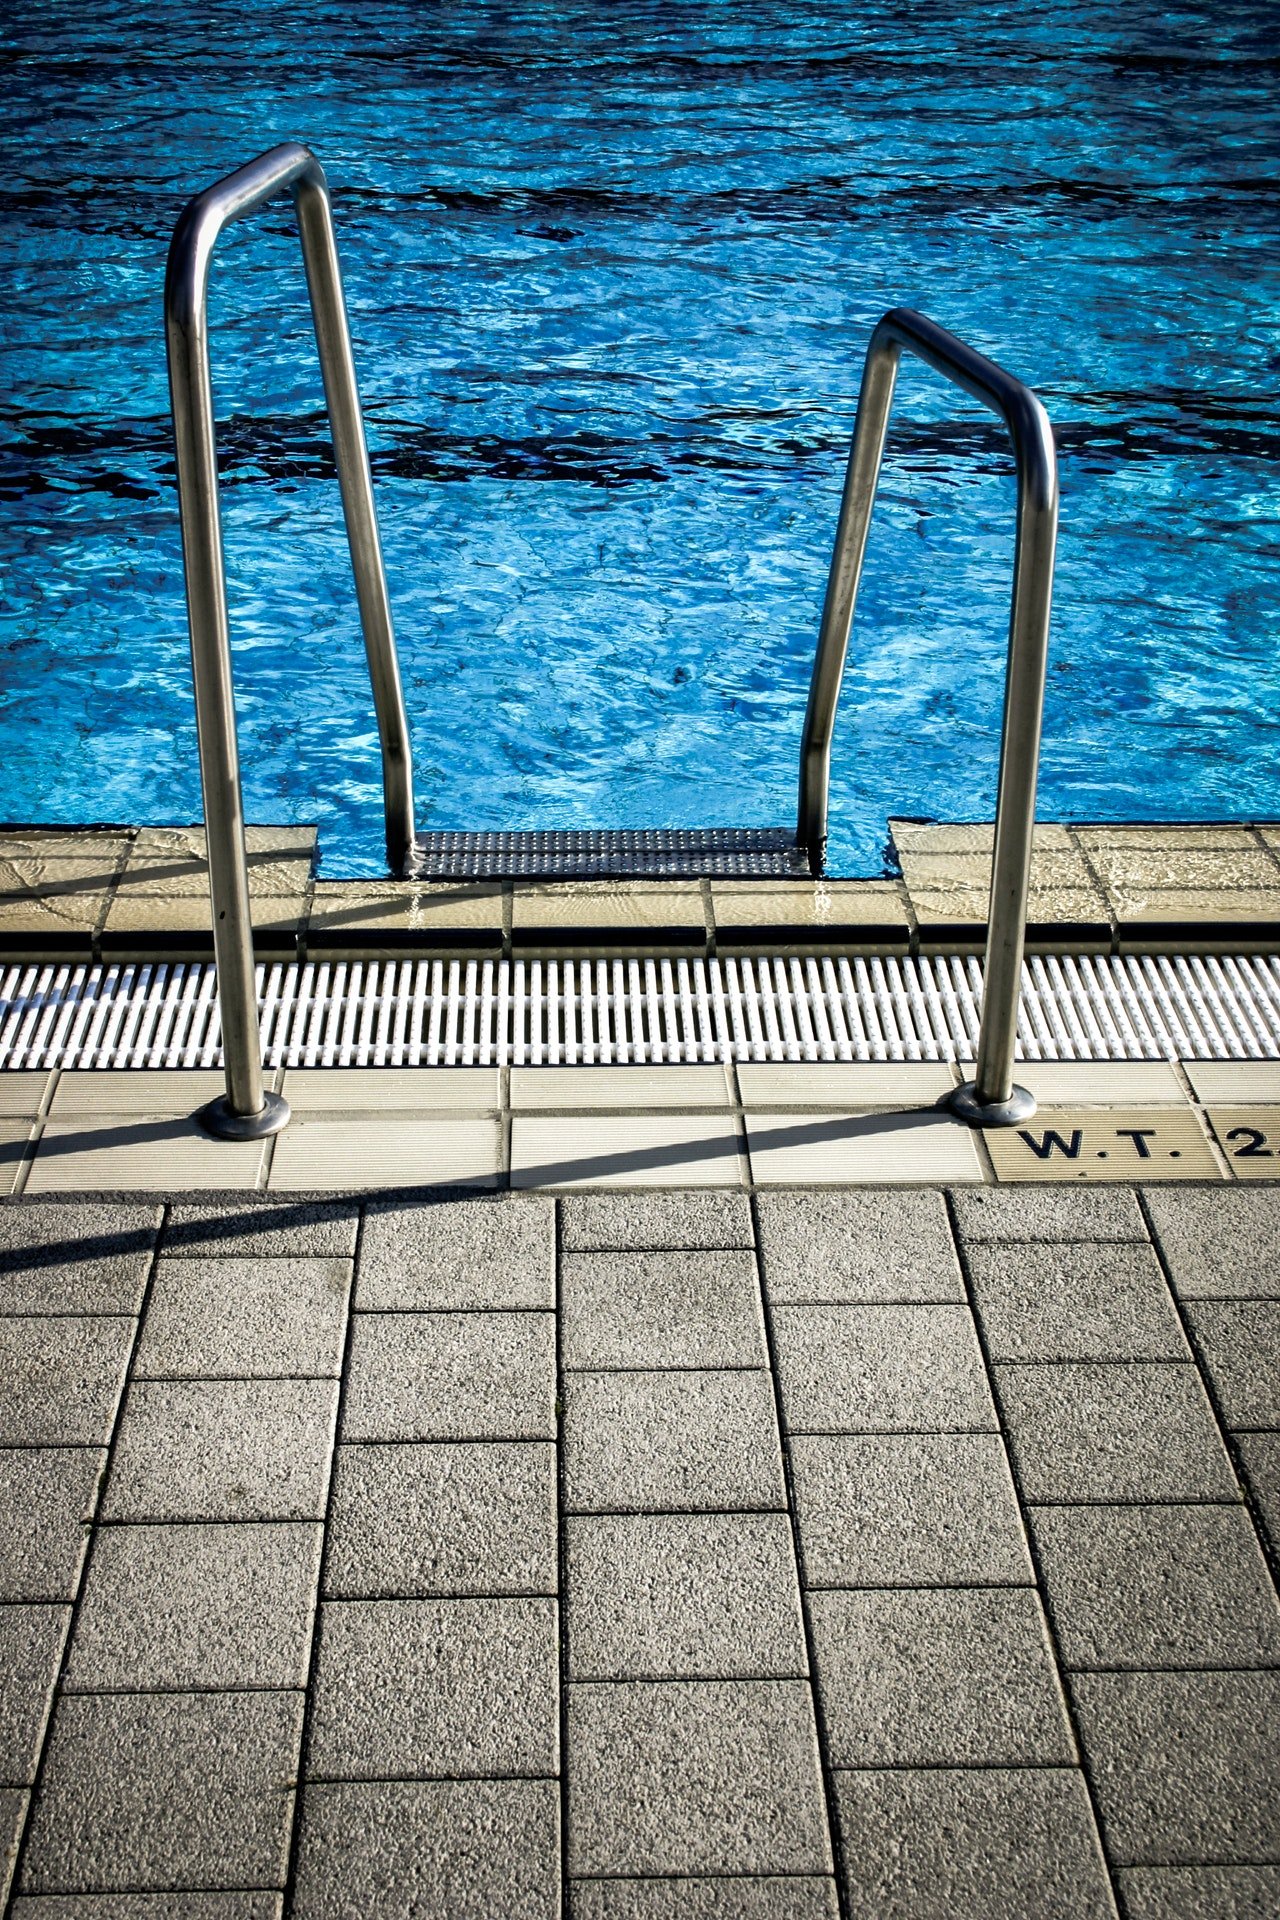 Photo of a swimming pool | Photo: Pexels